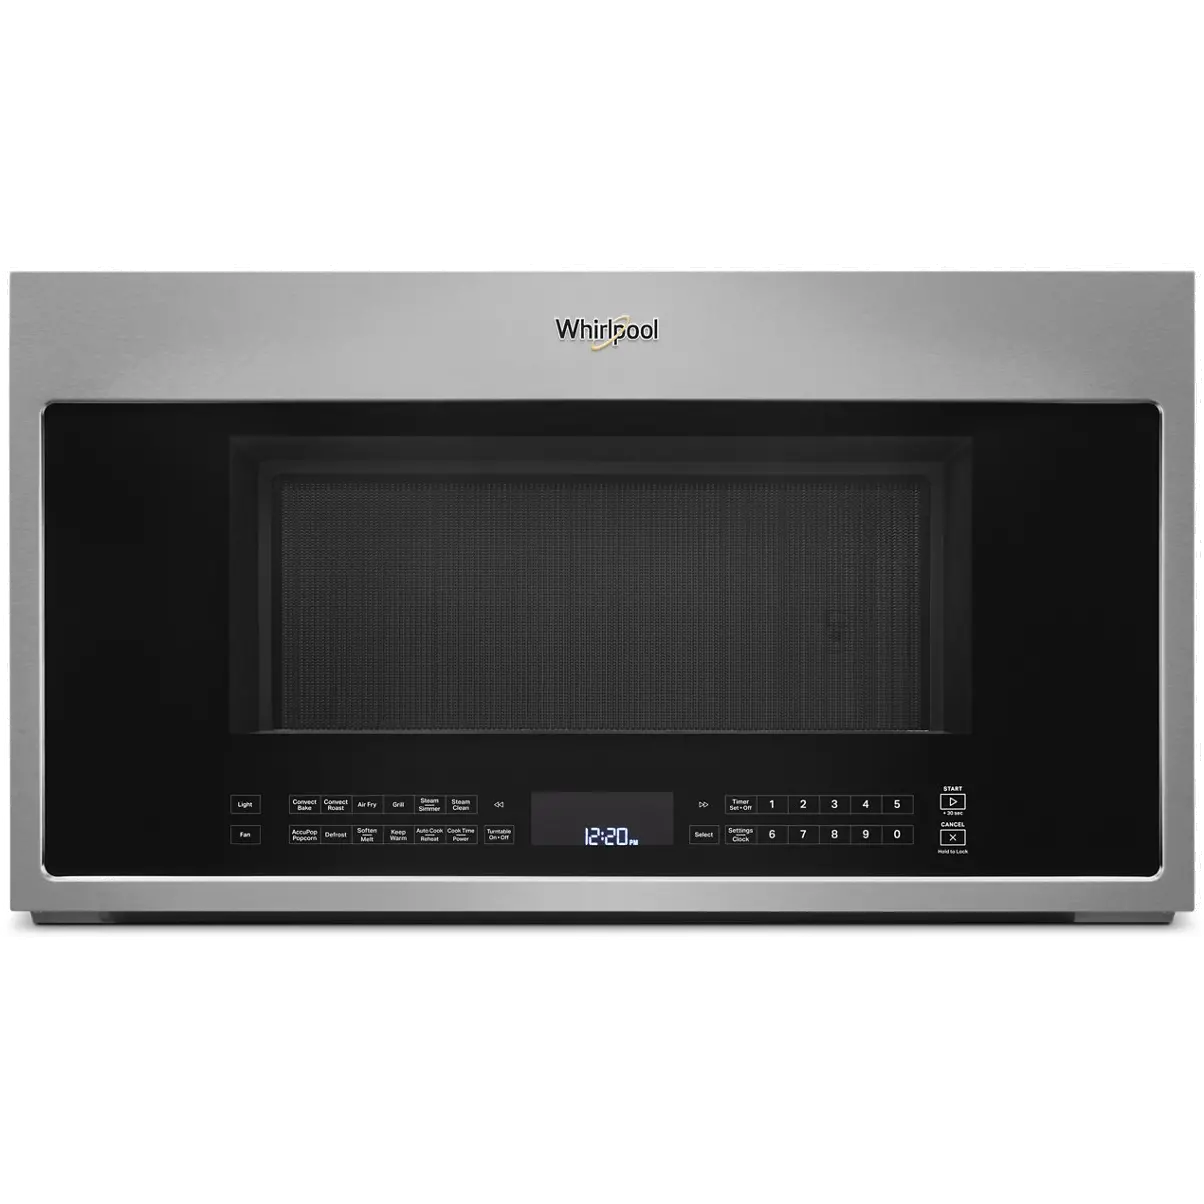 WMH78519LZ Whirlpool 1.9 cu ft Over the Range Microwave - Stainless Steel-1